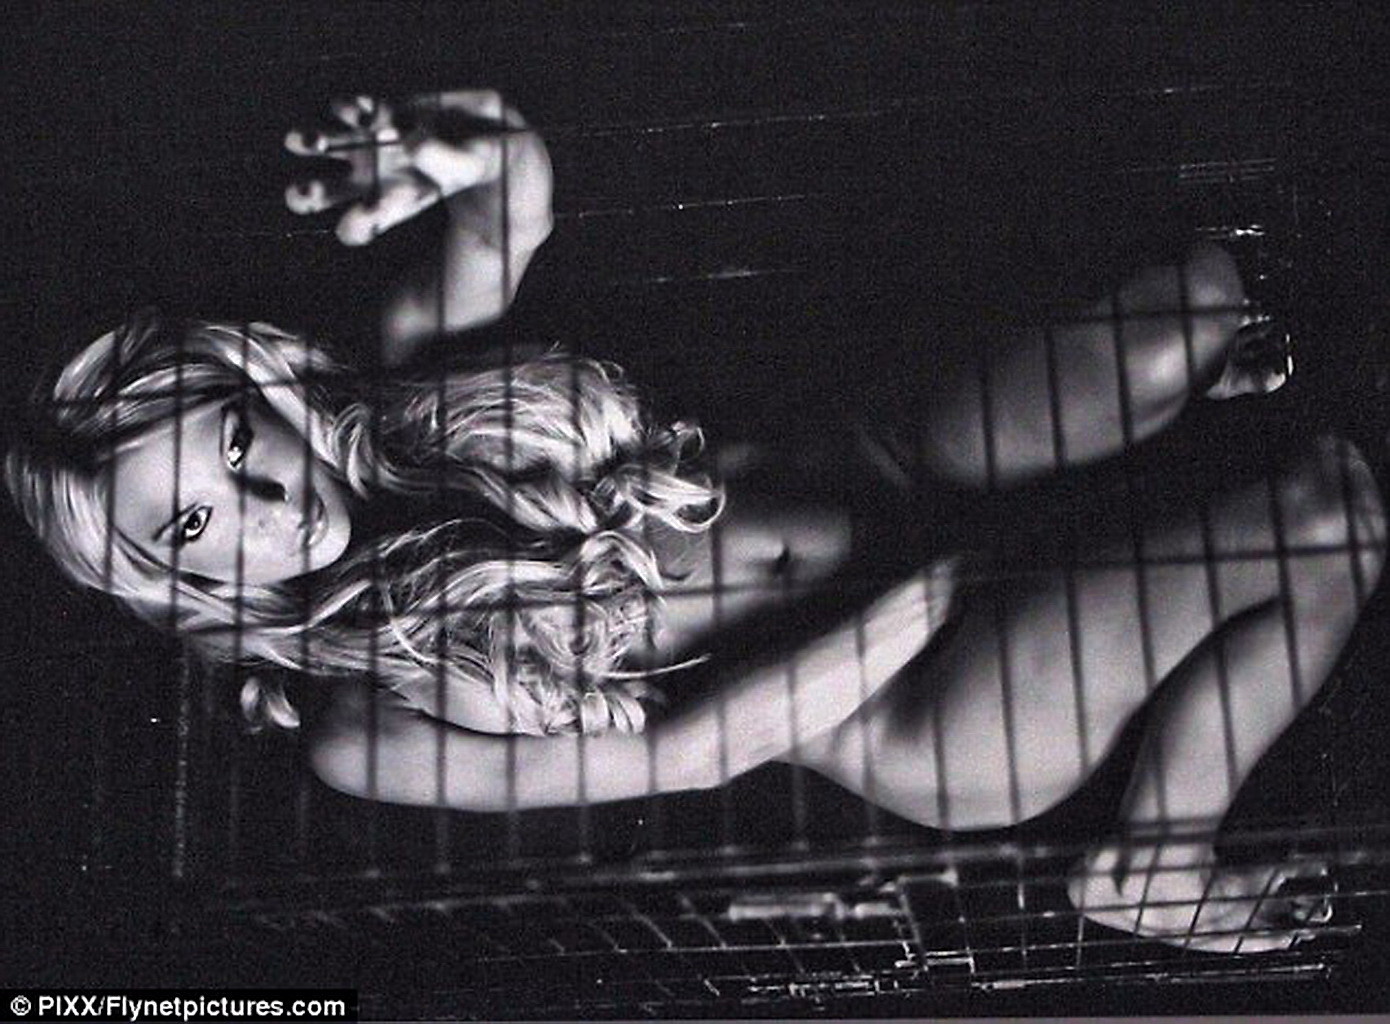 Brooke Hogan nude in cage for new PETA ad campaign #75292022